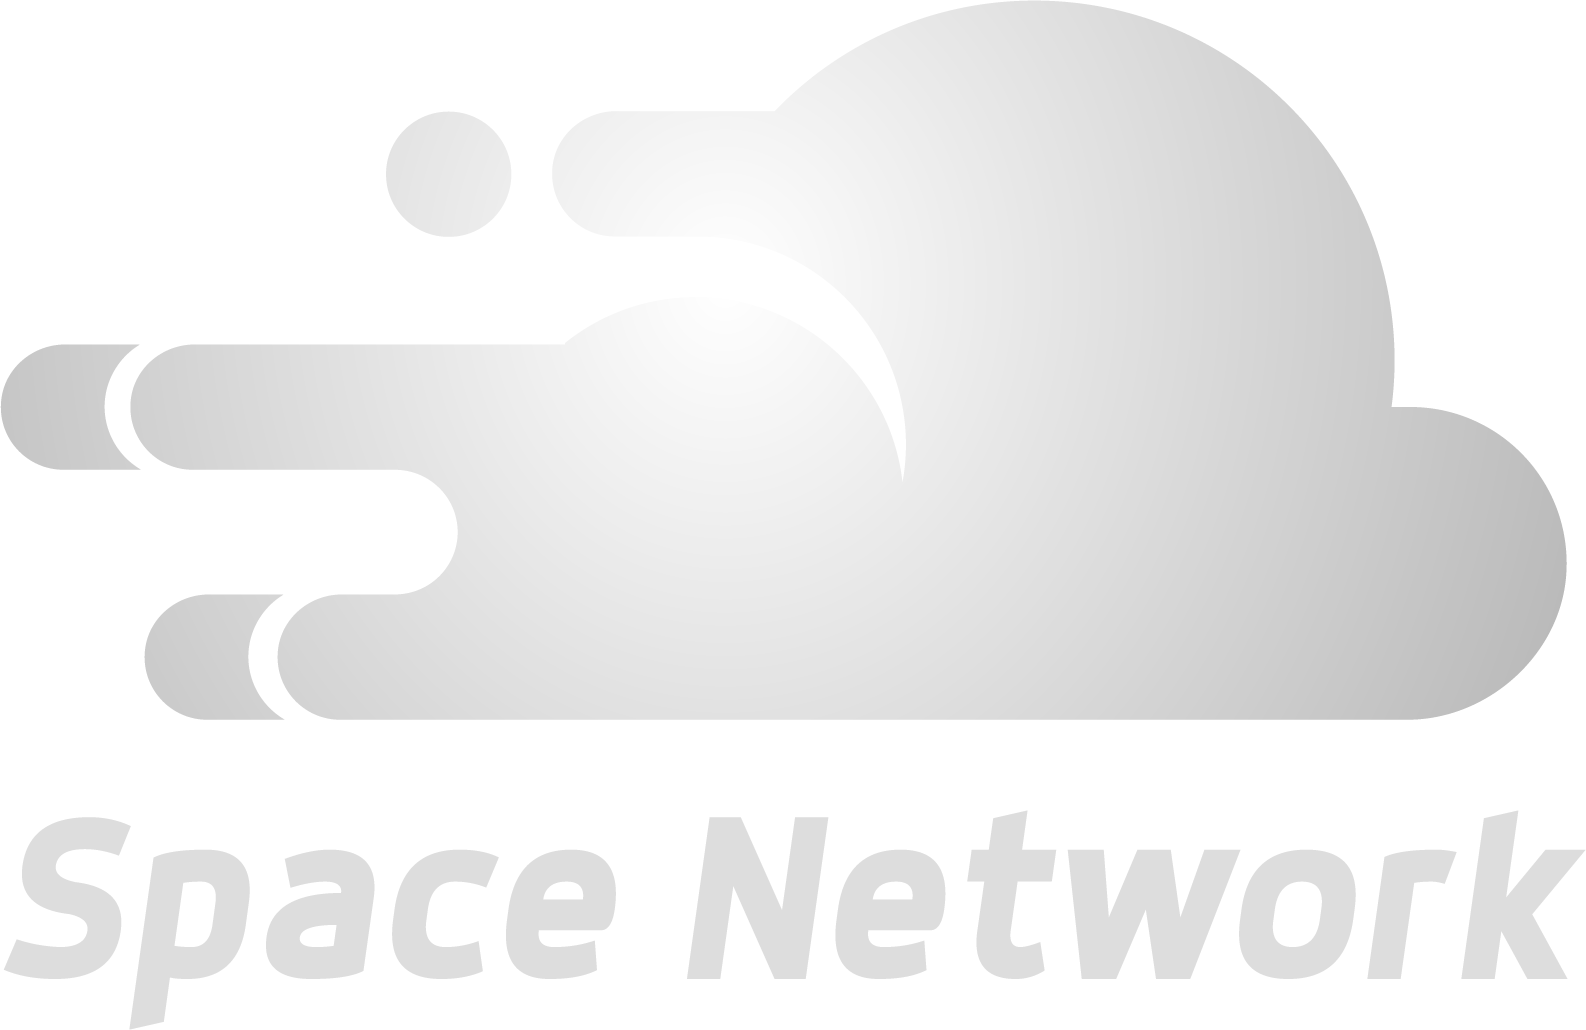 Space Network Logo